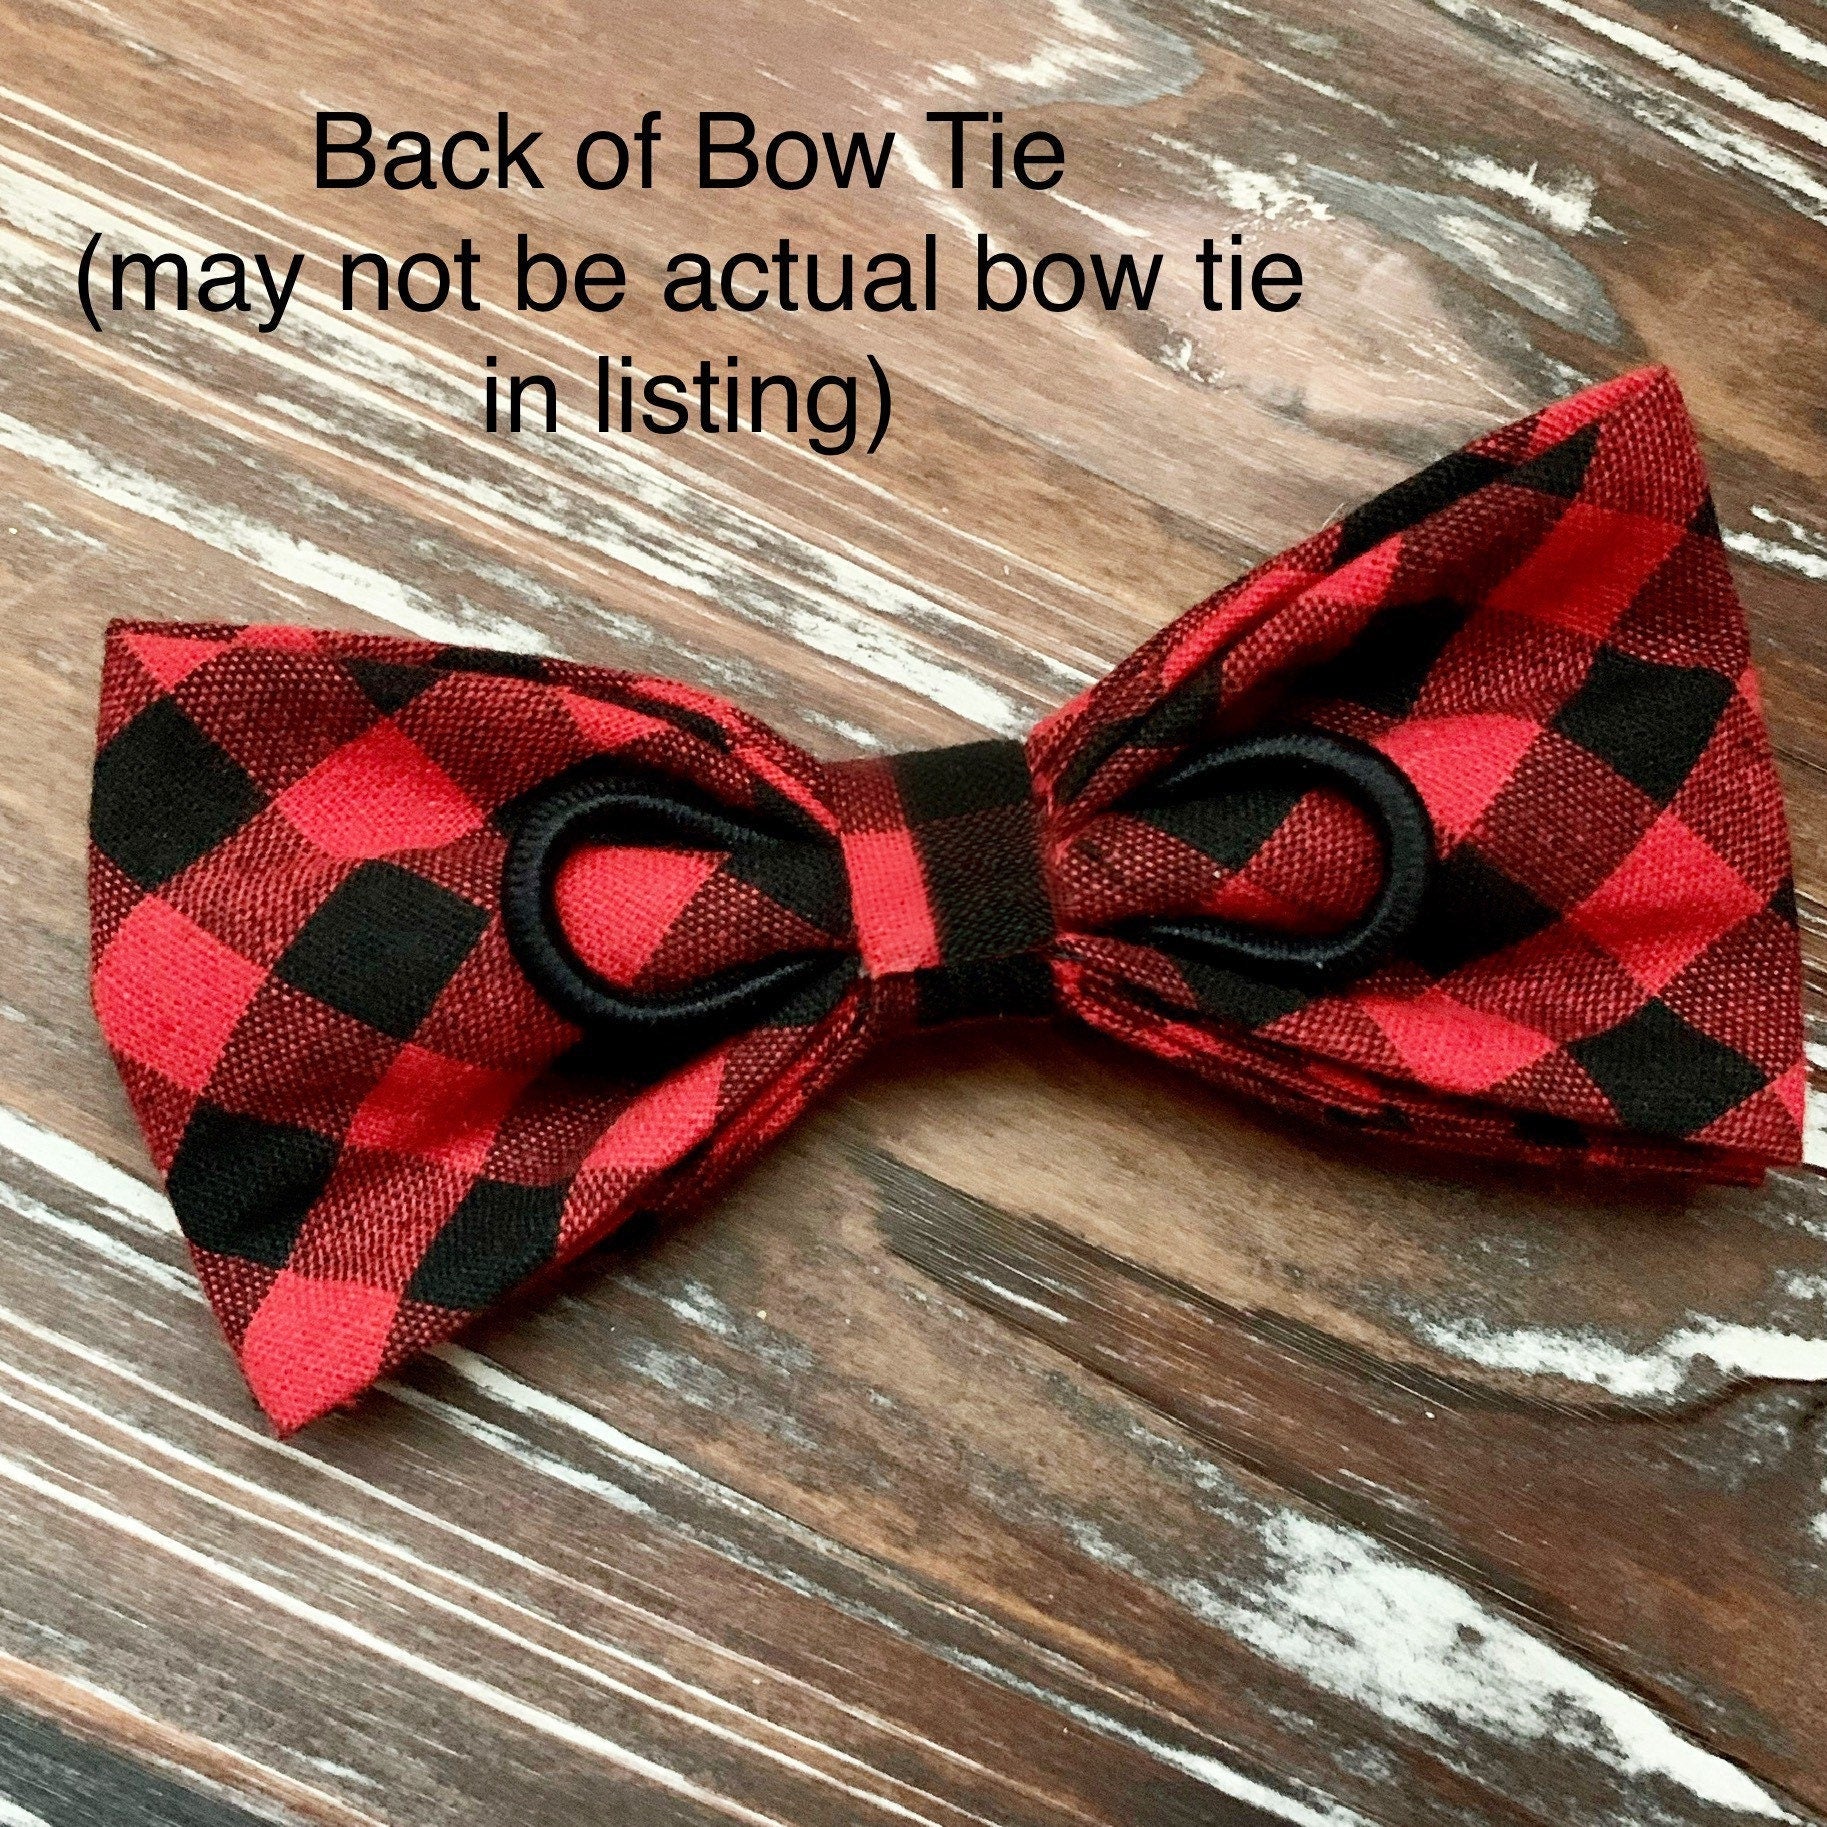 Red & White Tartan Plaid Bow for Dog Collar and Cat Collar